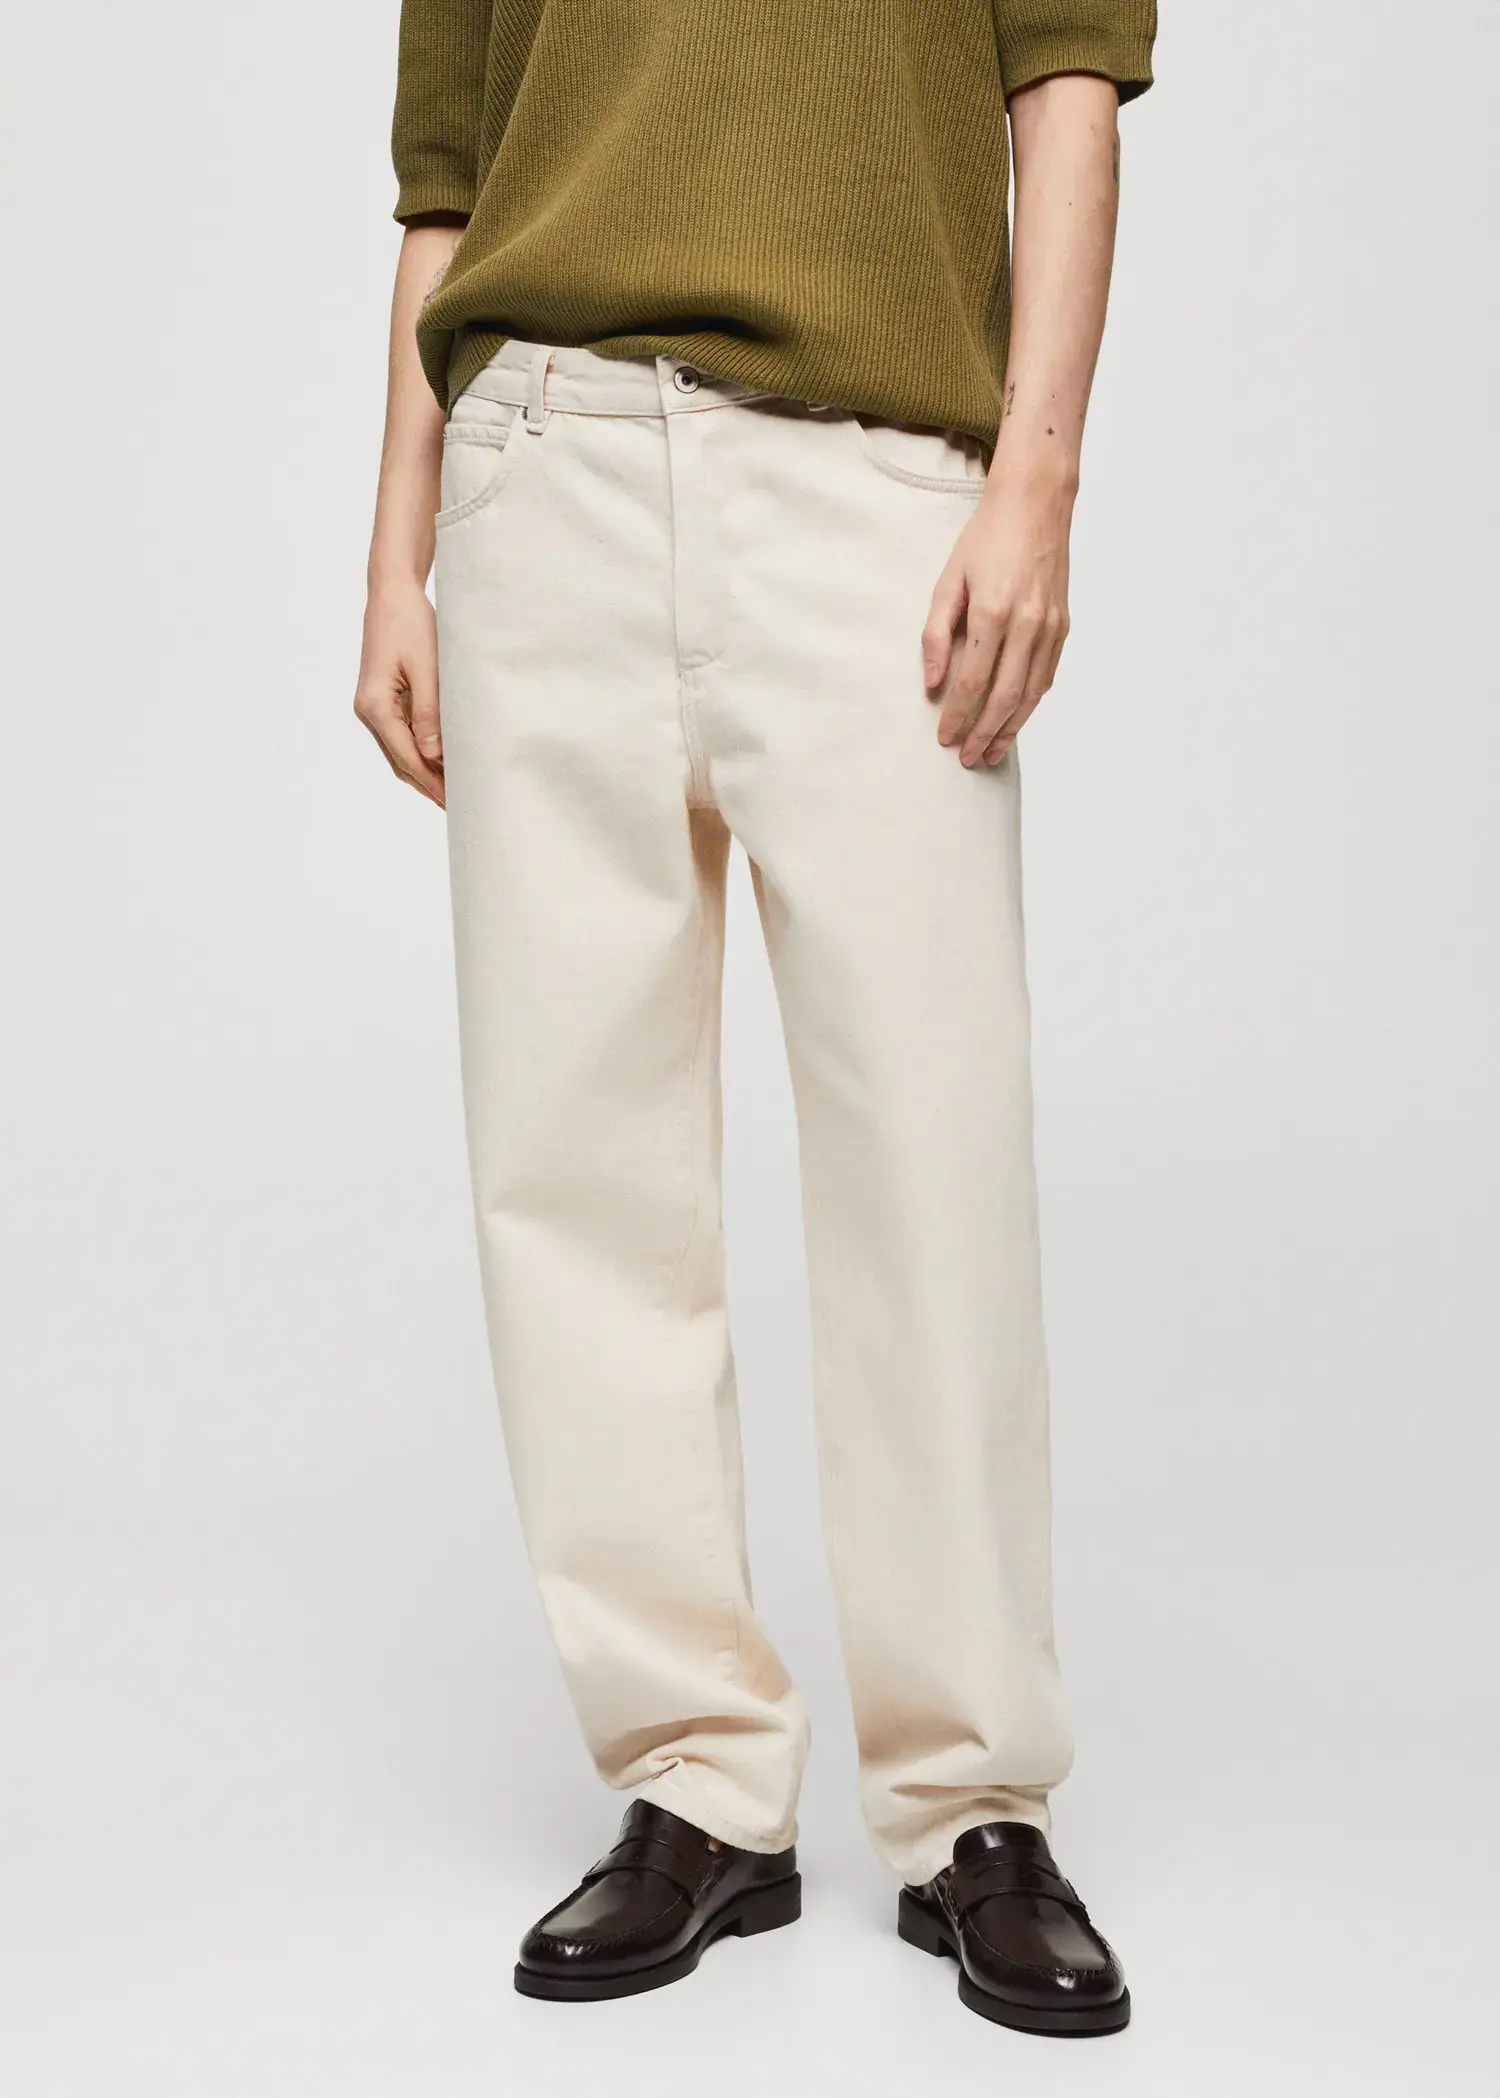 Mango Relaxed fit cotton jeans. 2